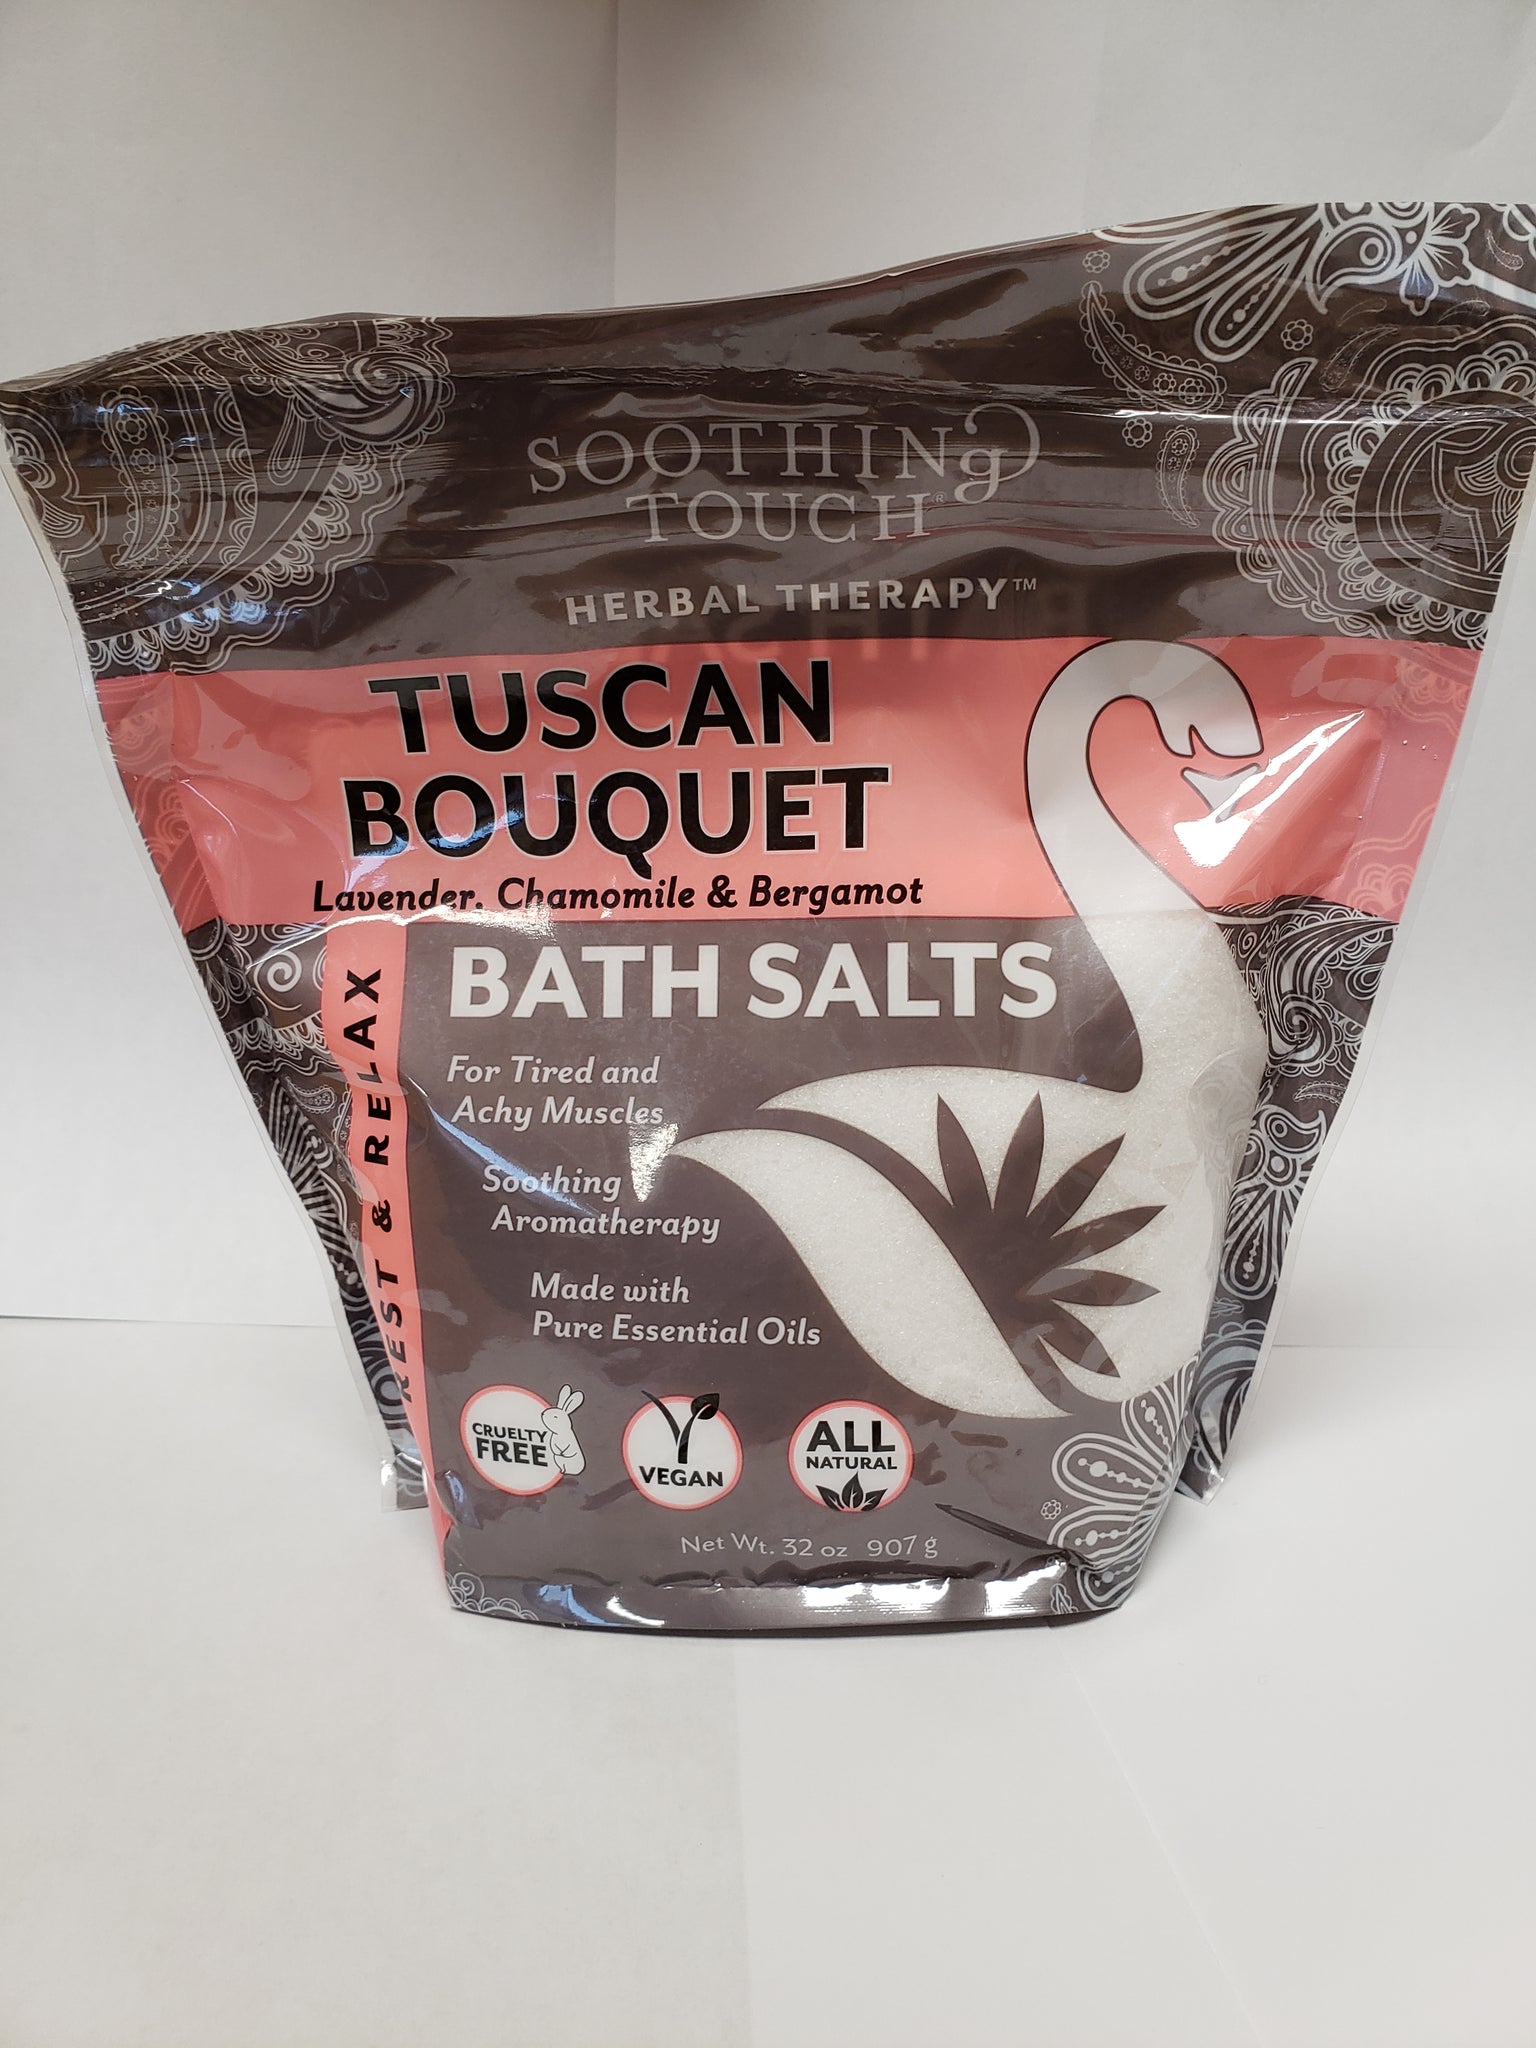 Soothing Touch Bath Salts - Tuscan Bouquet